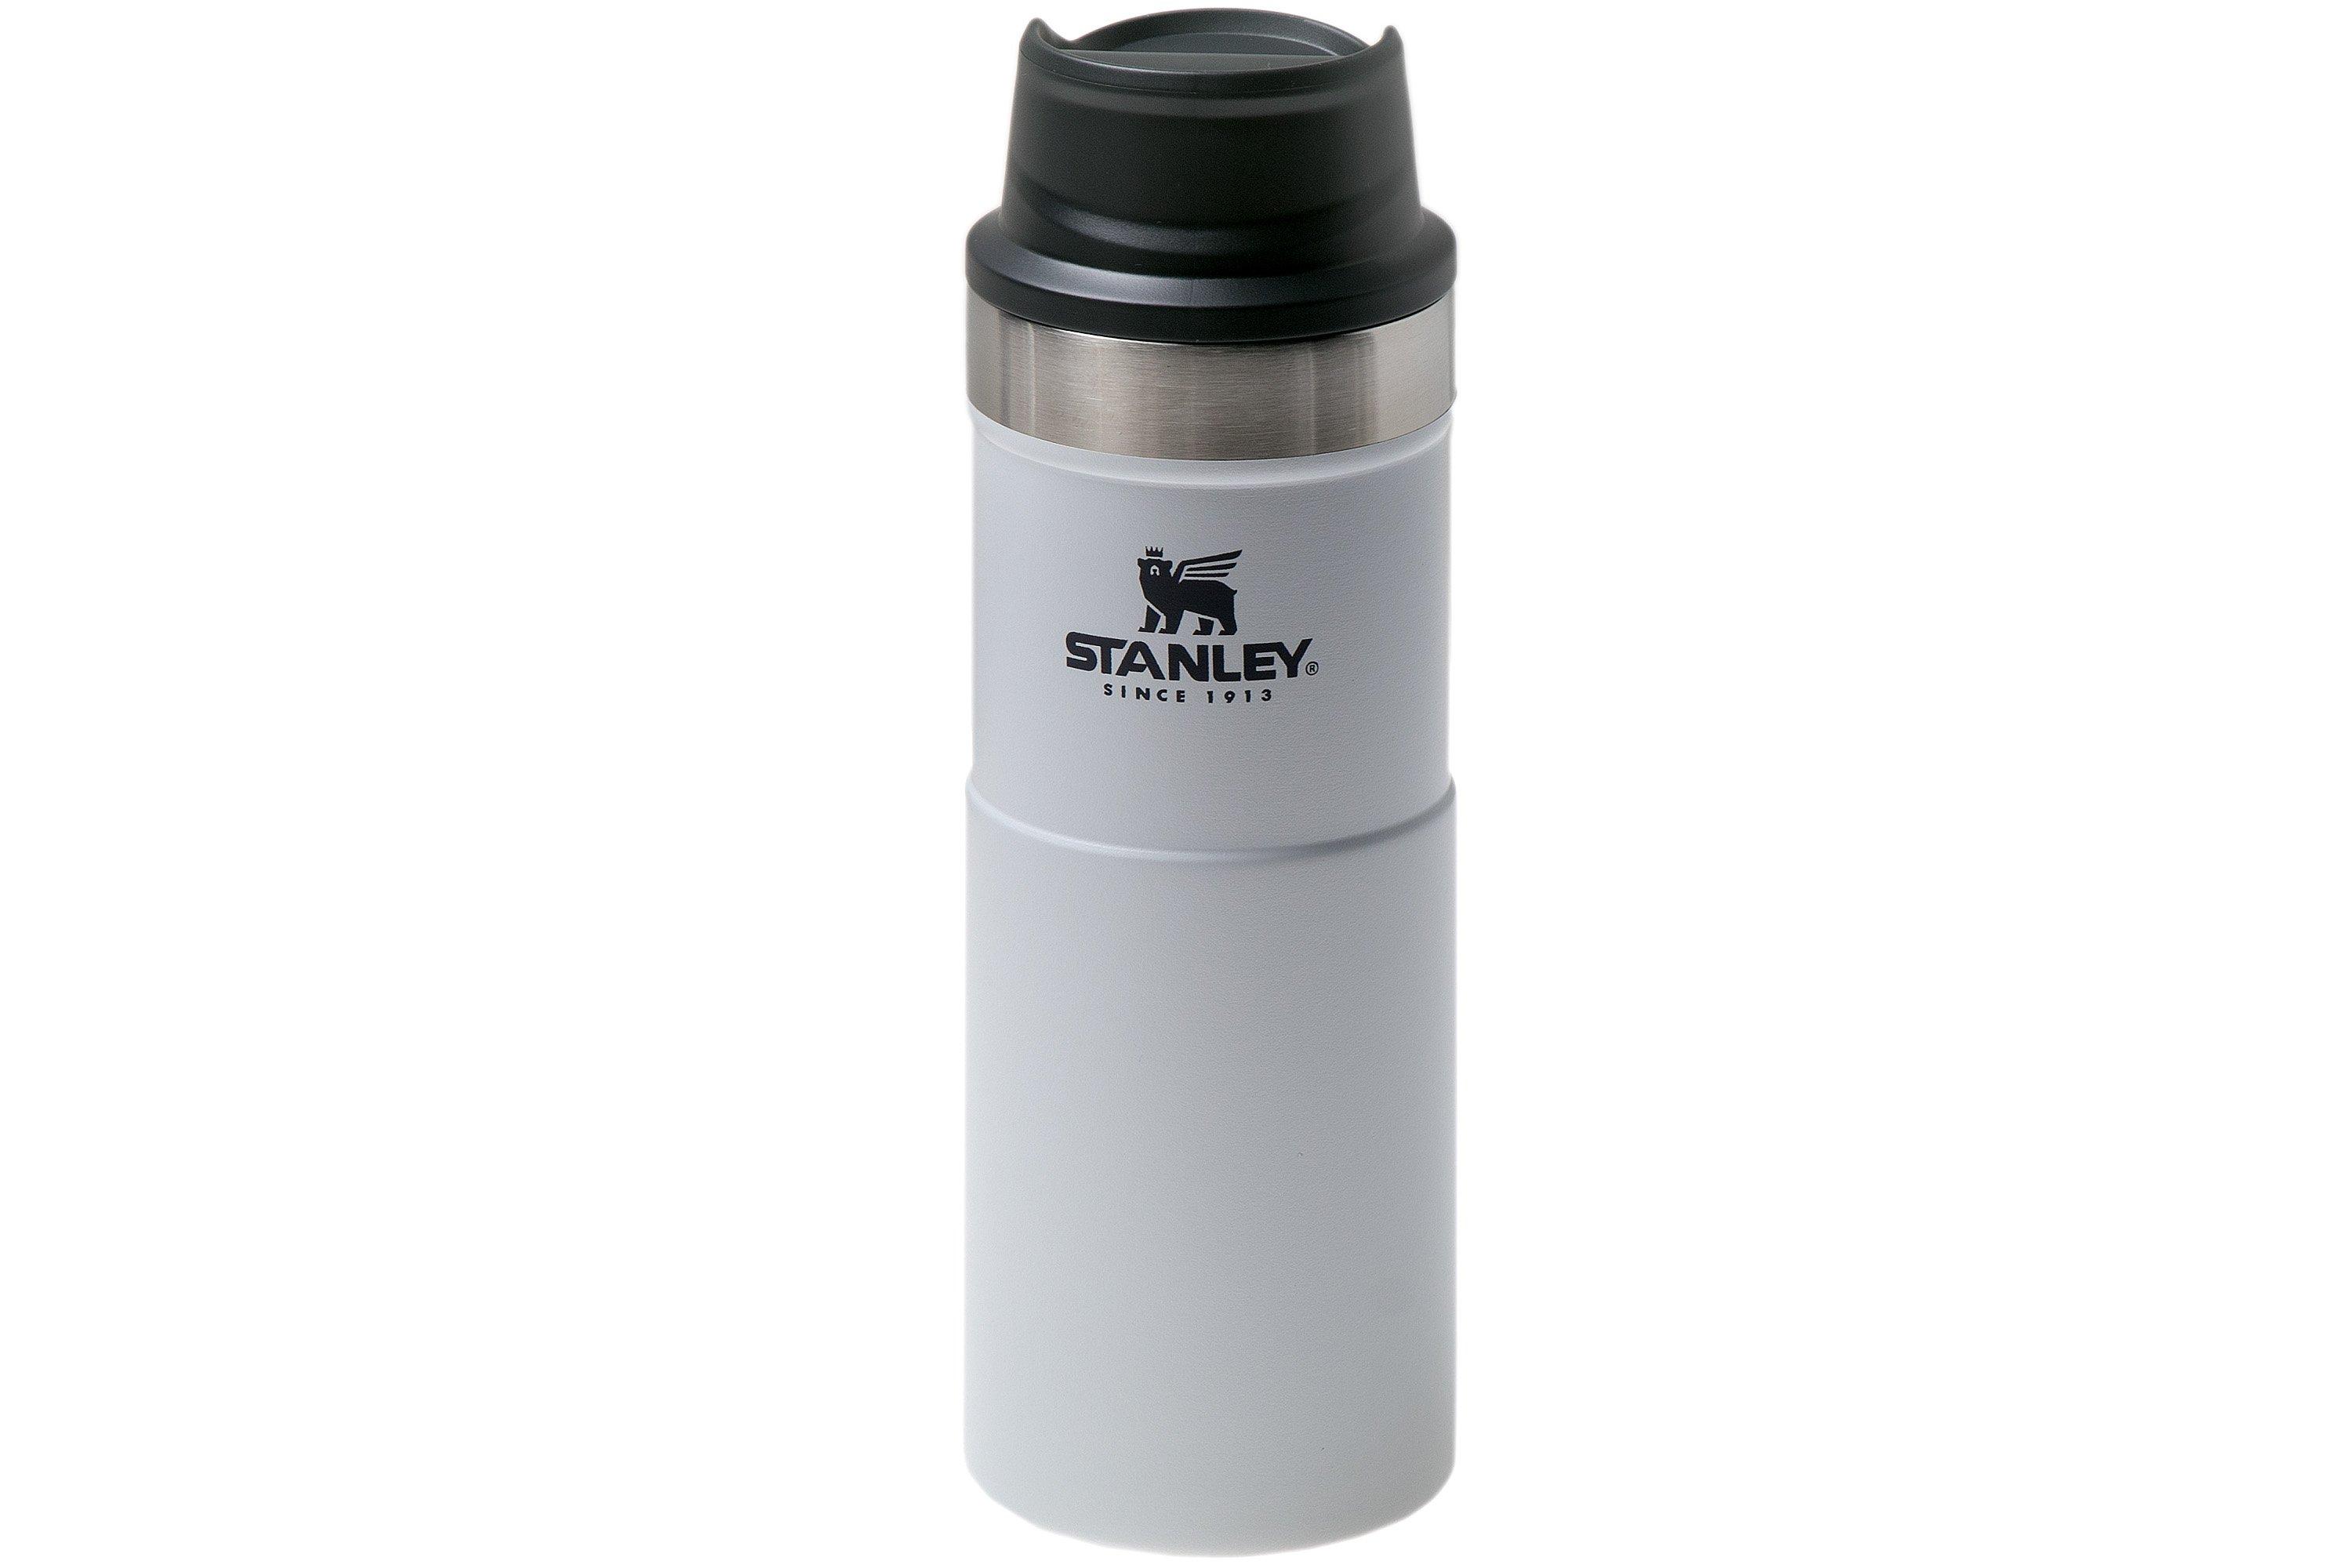 Trigger-Action Travel Mugs: PMI's Stanley Brand Keeps Coffee Hot